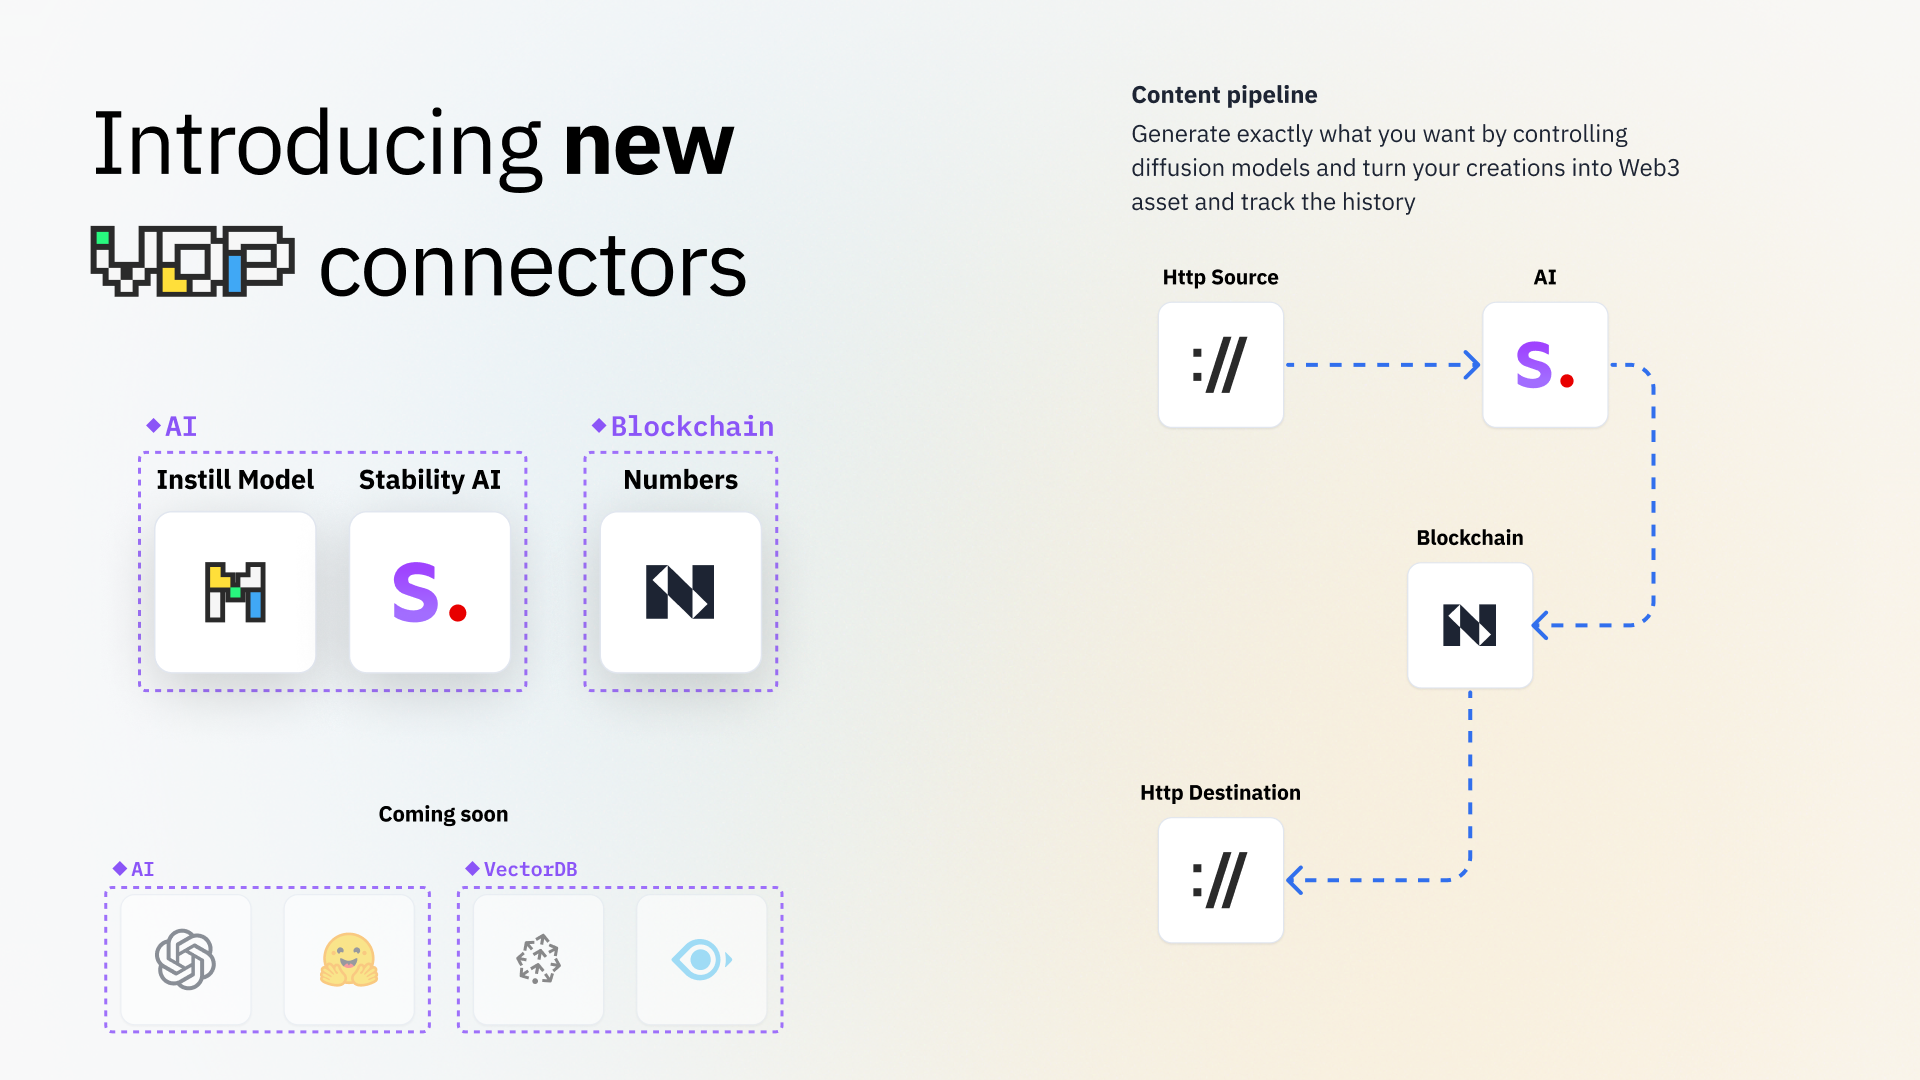 Introducing new VDP connectors: Stability AI AI Connector and Numbers Protocol Blockchain Connector.